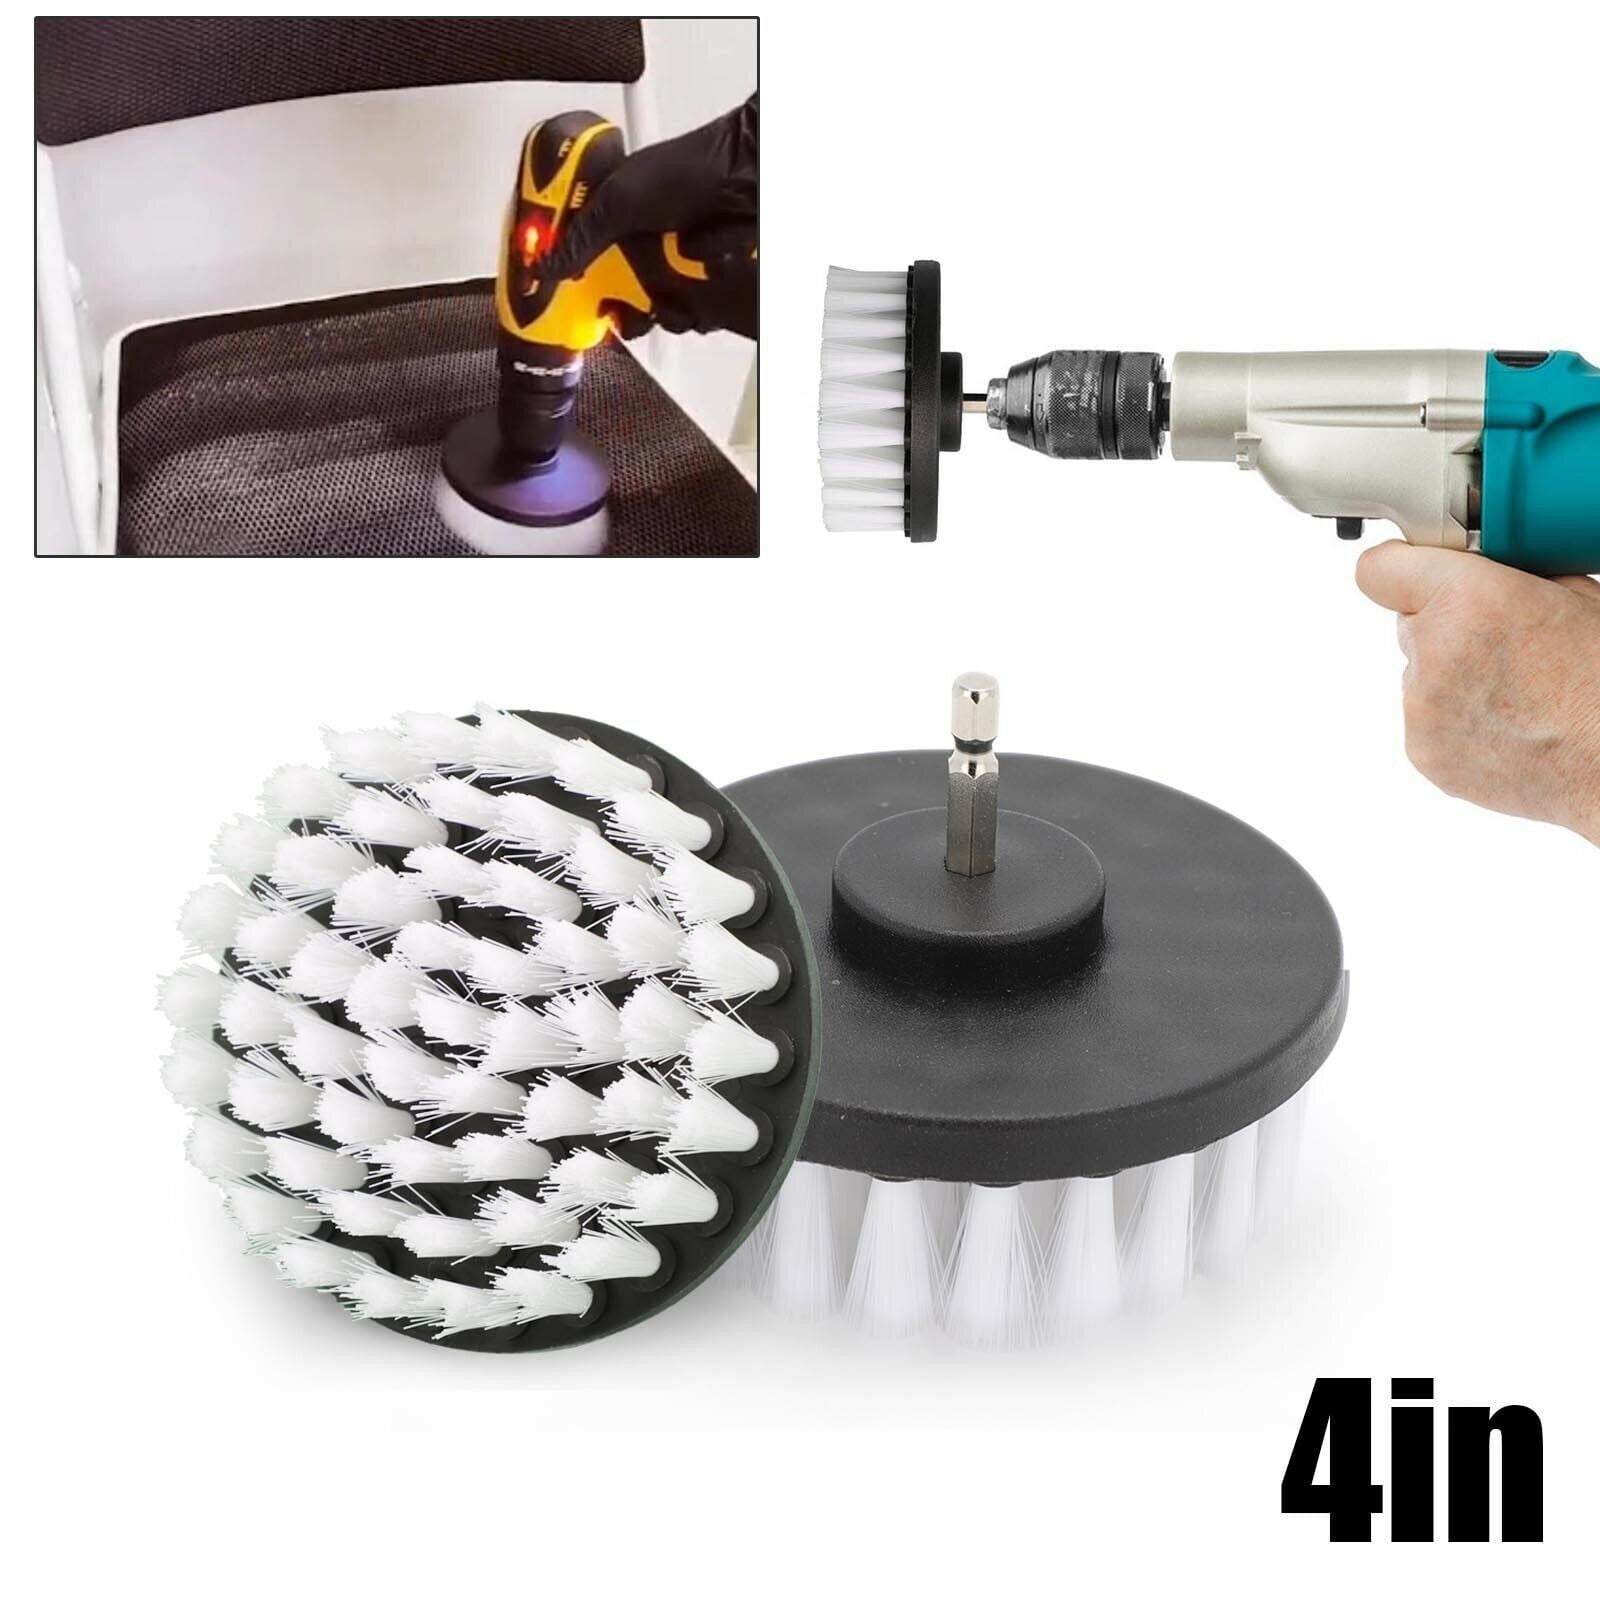 Drill Brush Attachment Fit For Cleaning Carpet Leather Upholstery Tool Kit 